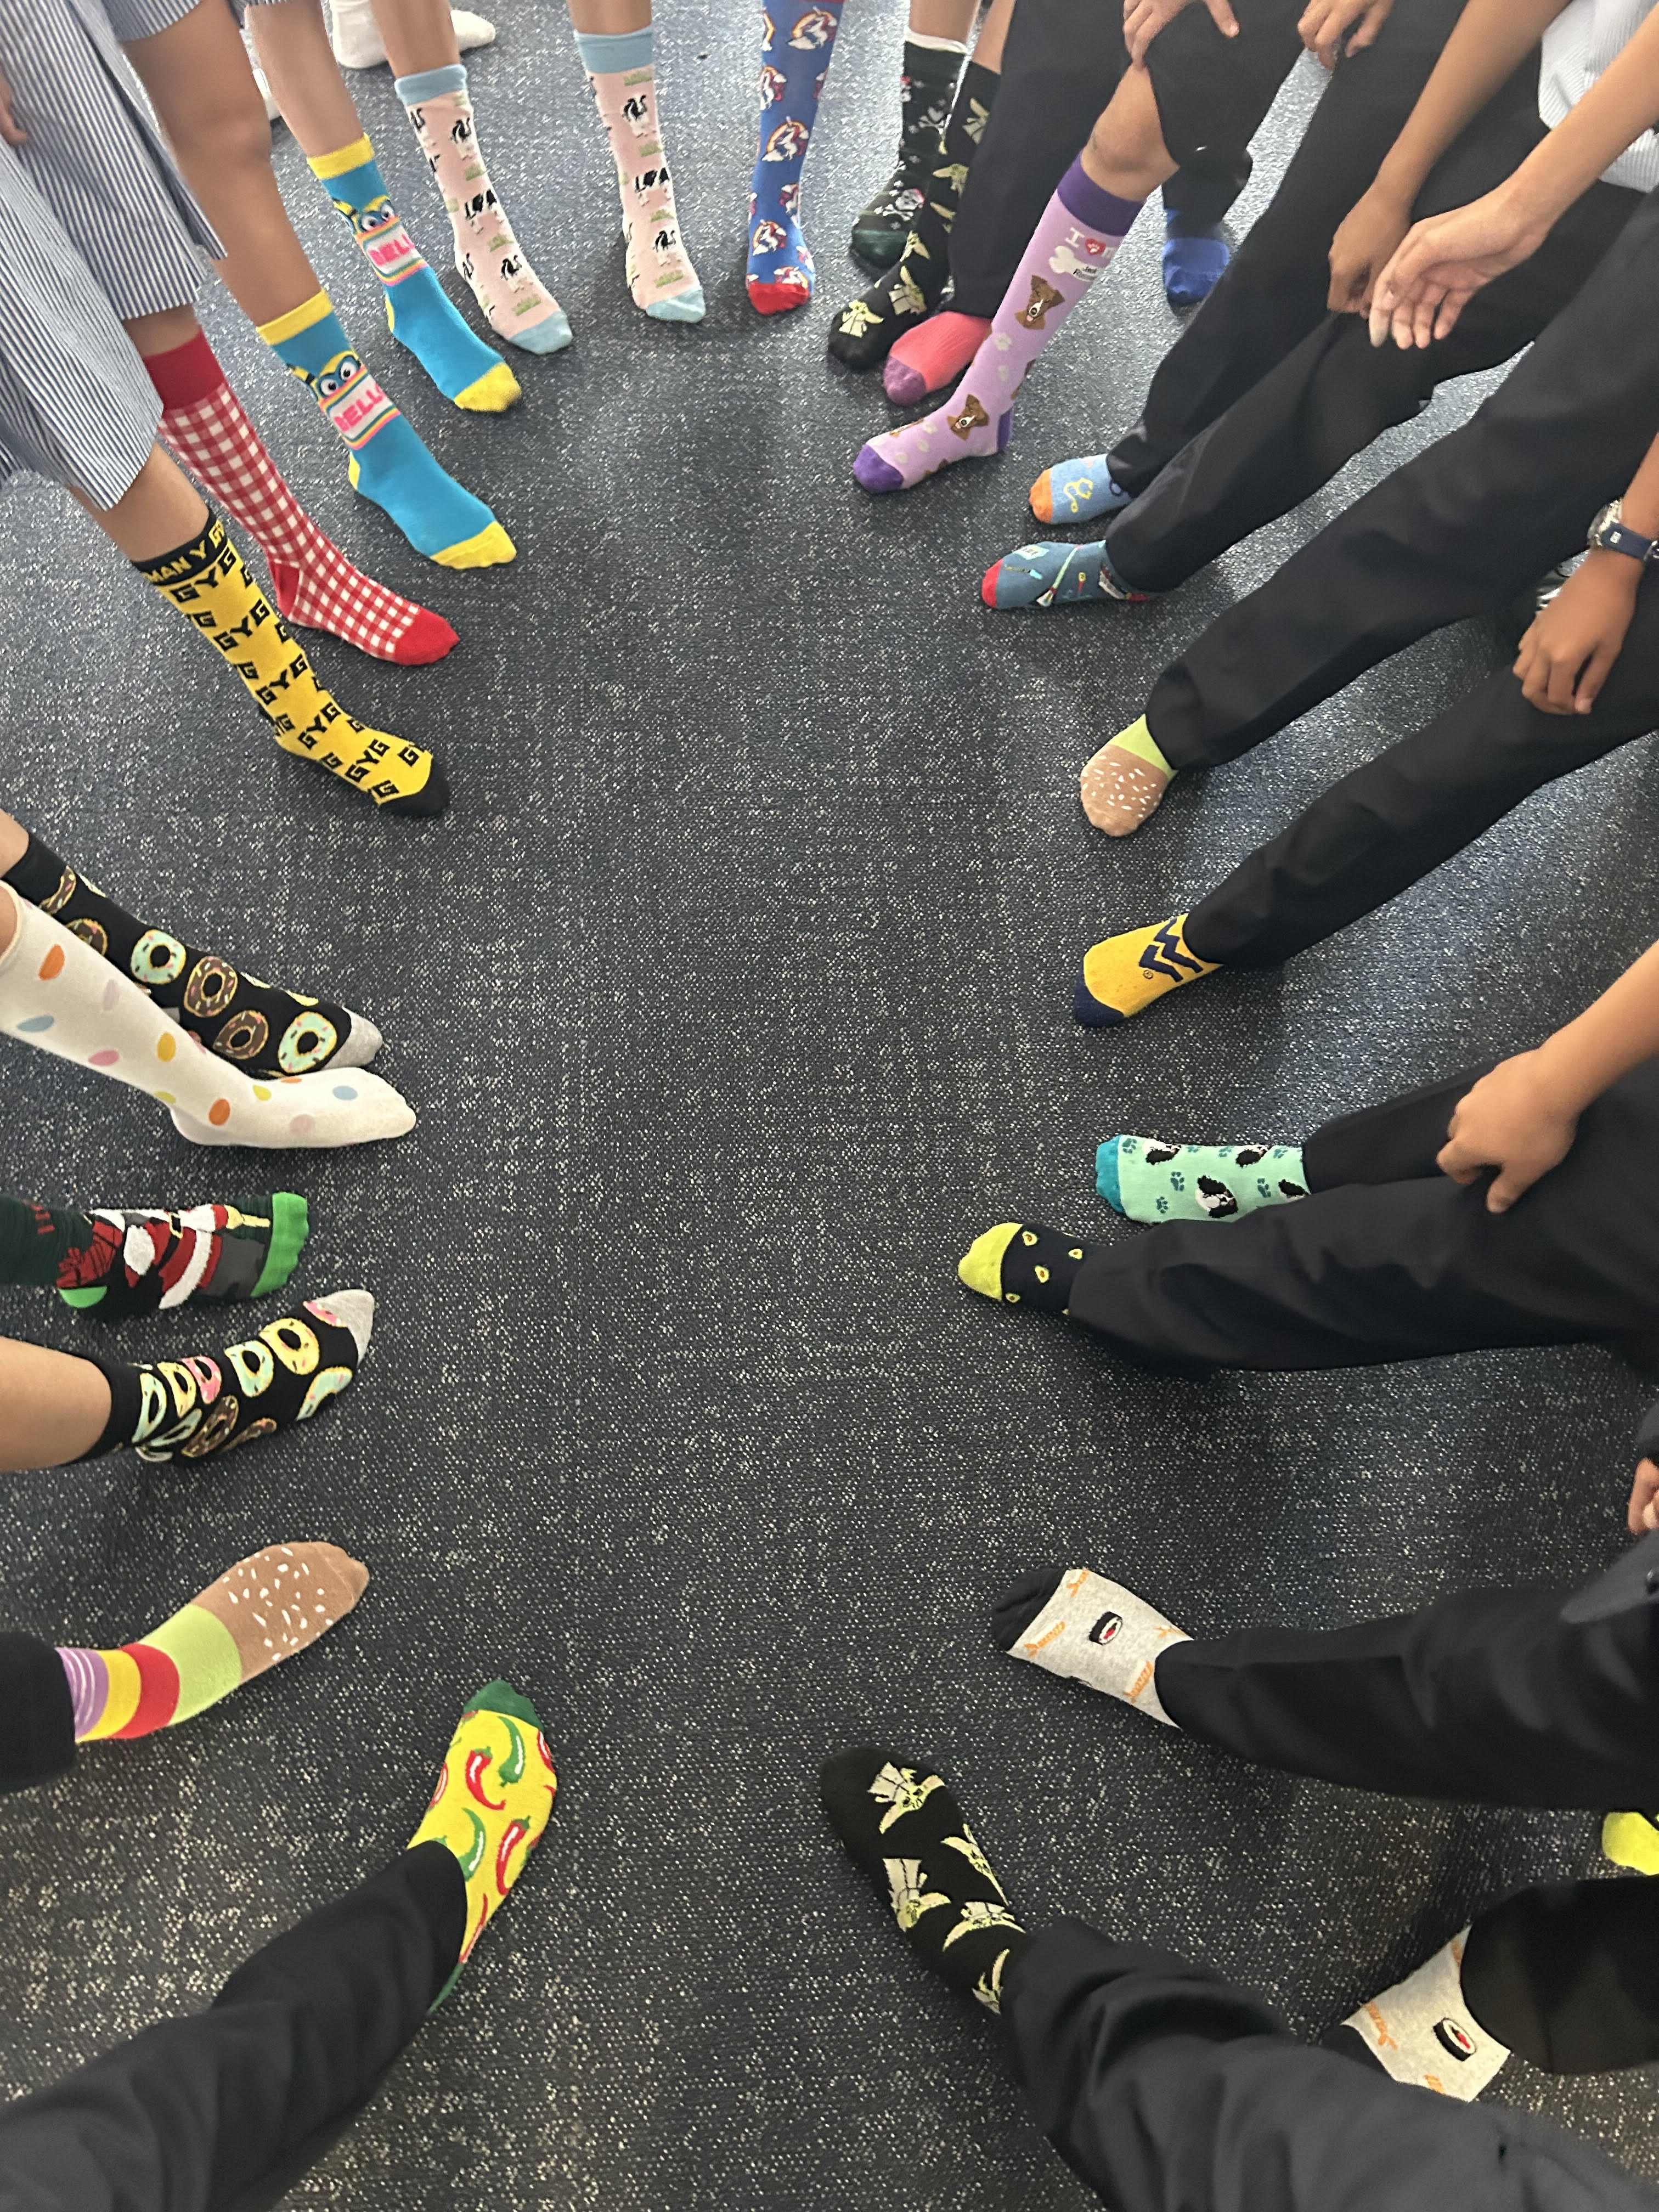 20230324 Crazy socks ConnectED World Down Syndrome Day.jpg